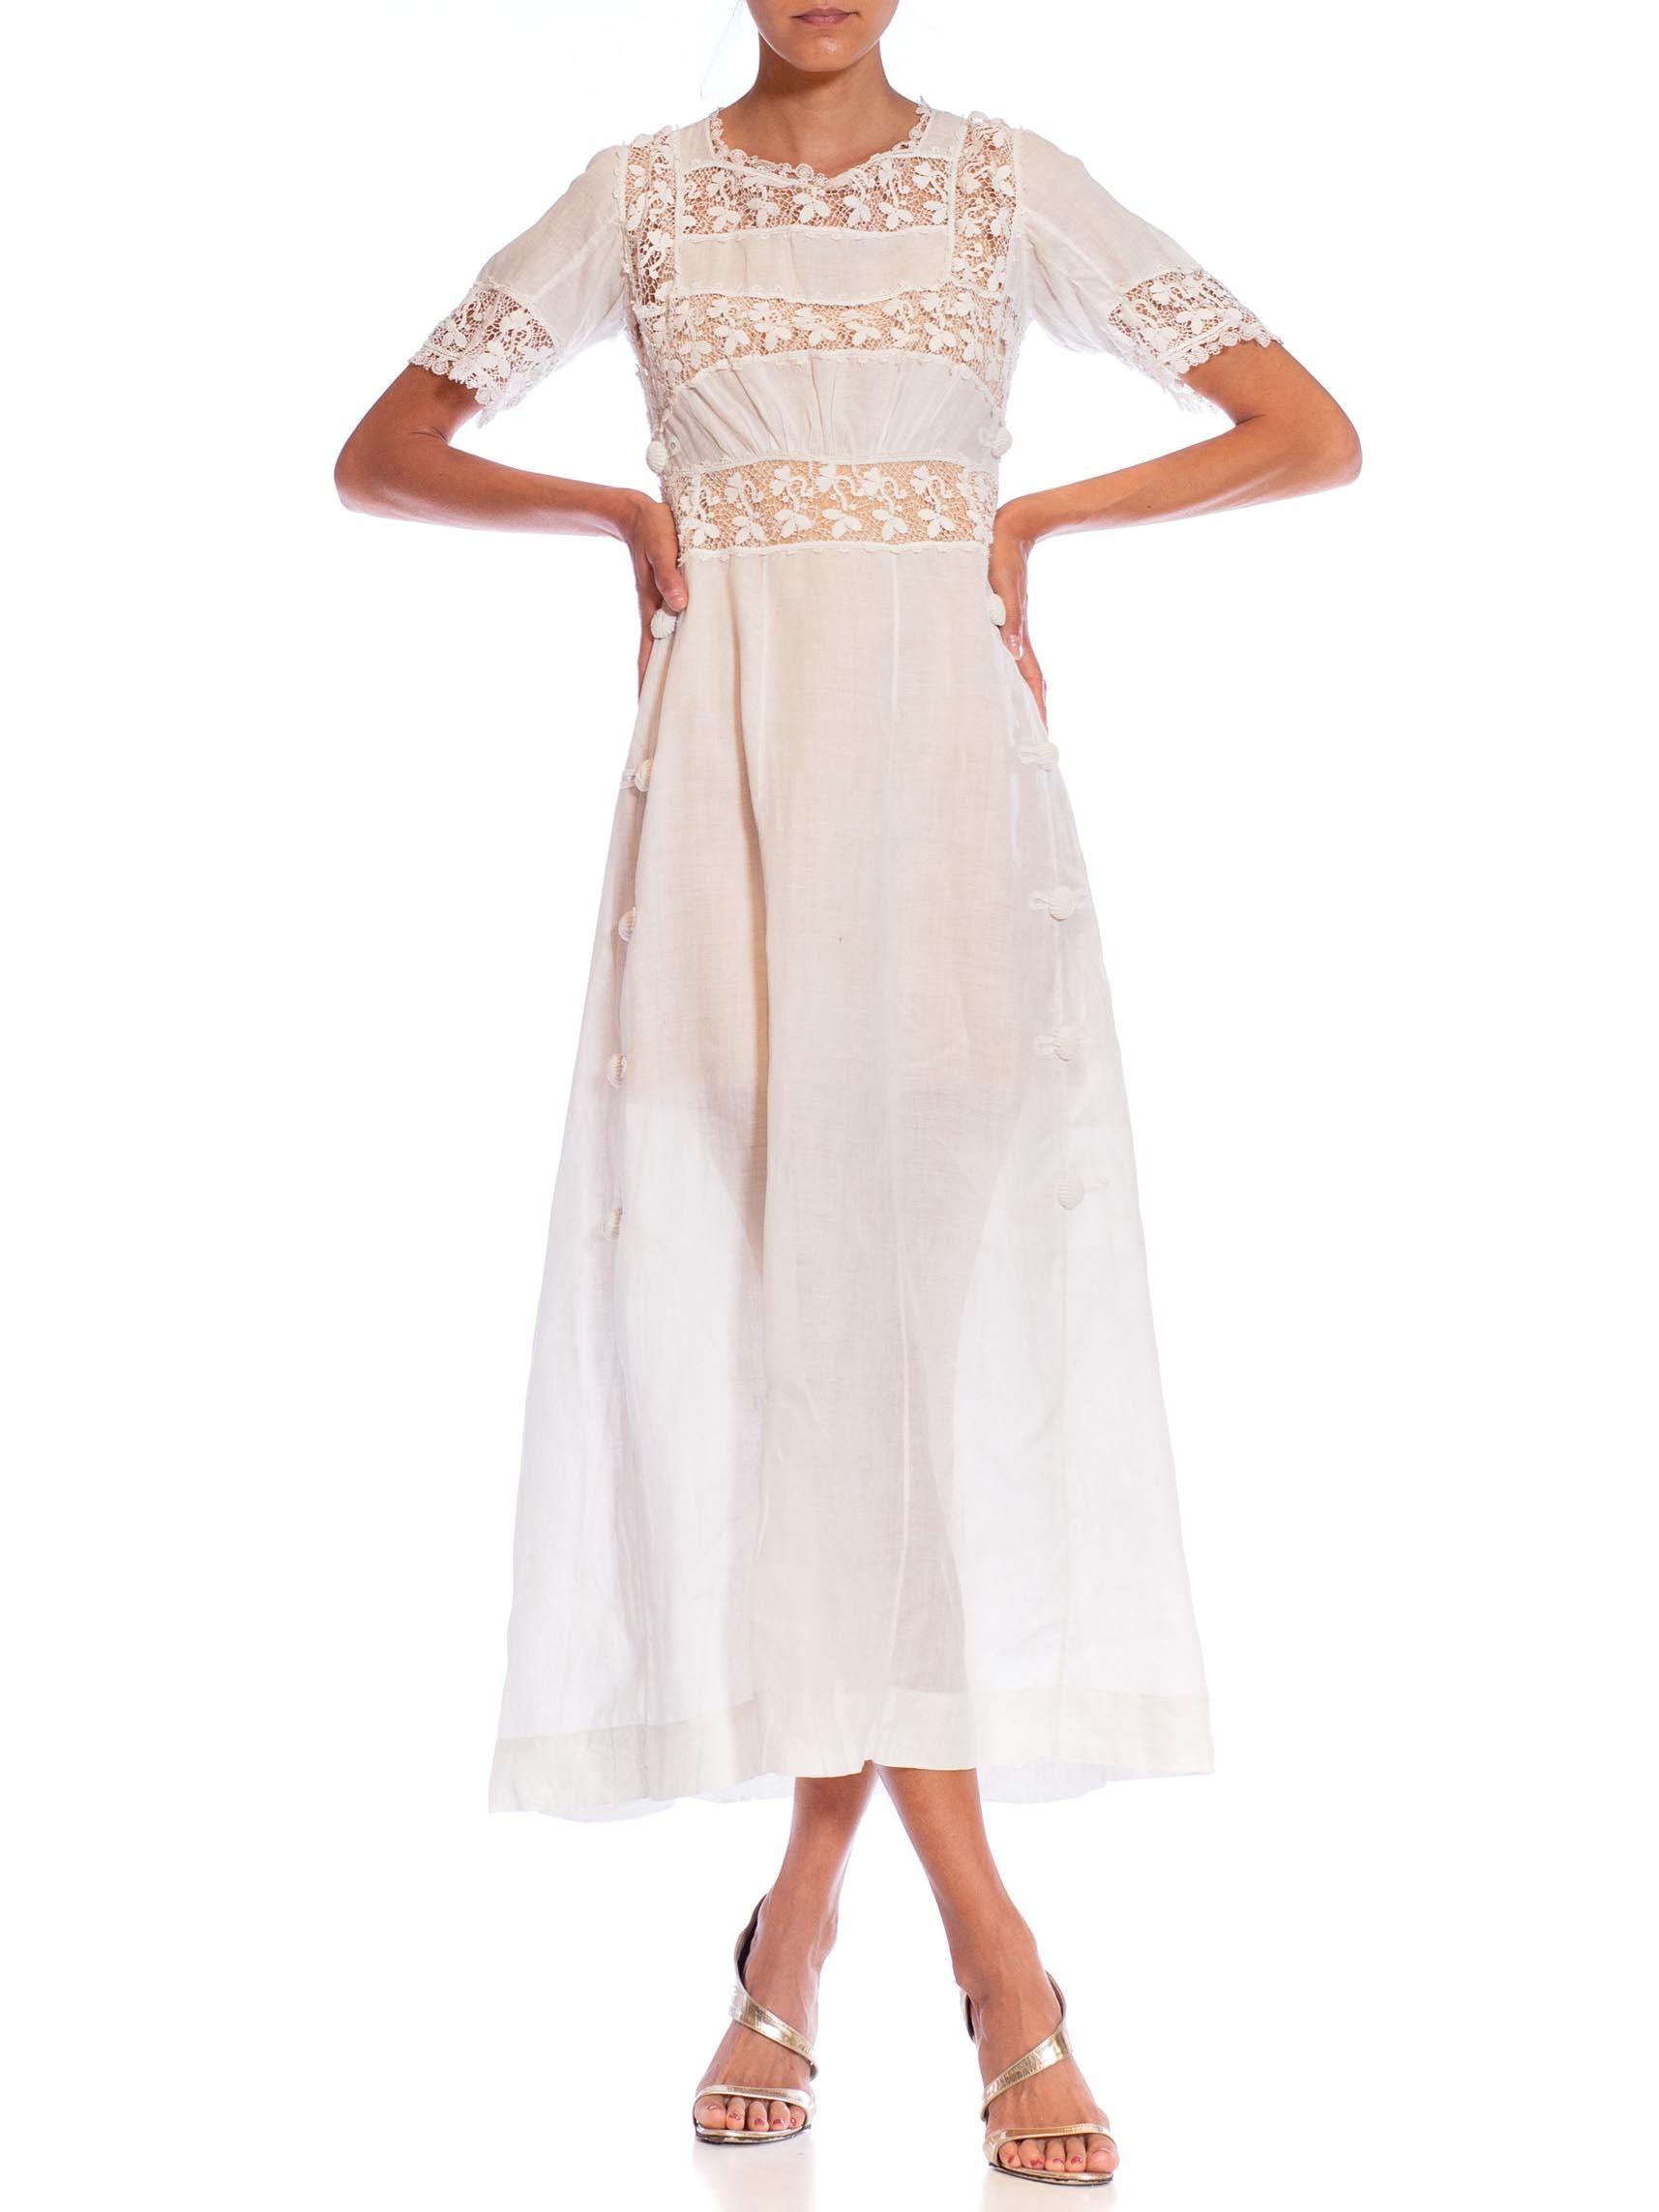 Edwardian White Linen & Lace Tea Dress With Sleeves For Sale 1